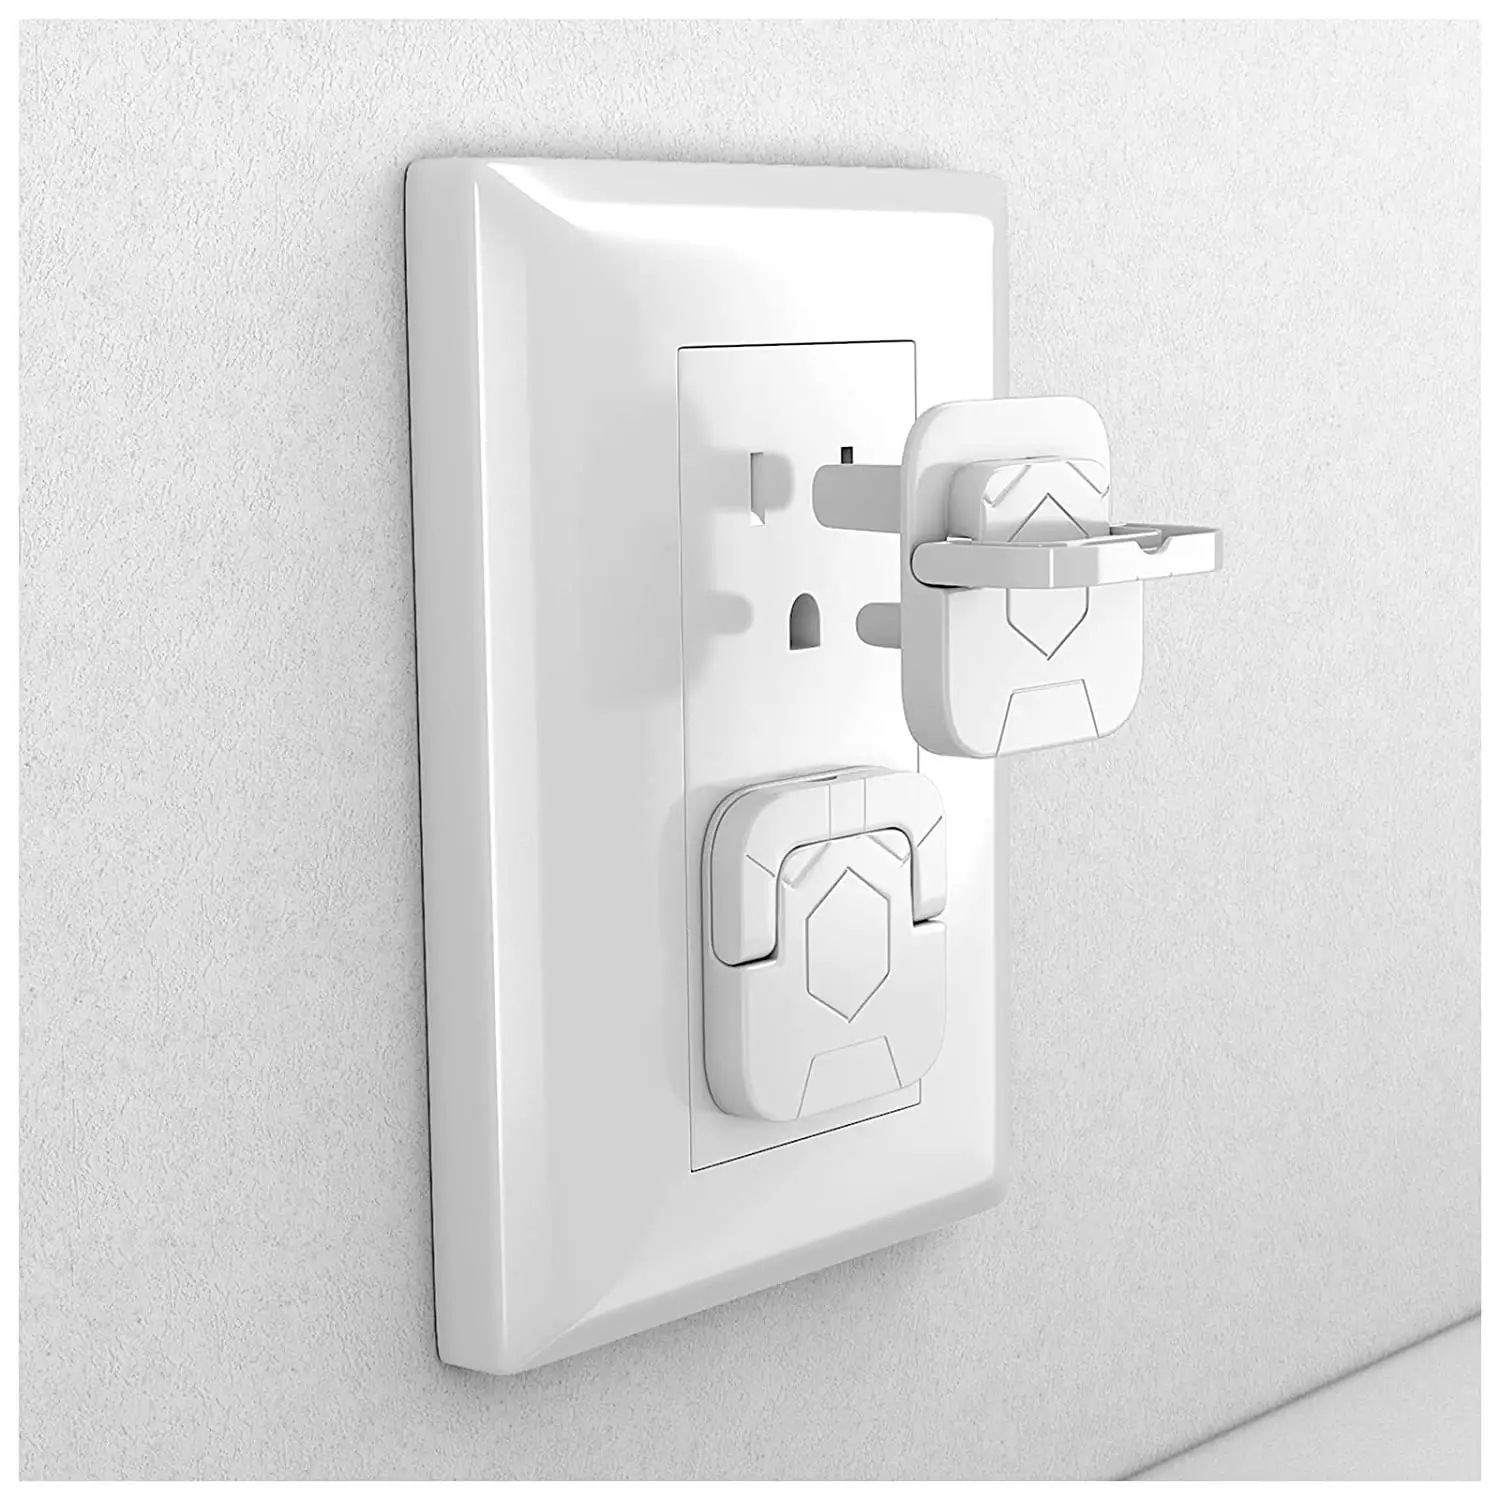 Power Socket Electrical Outlet Kids Safety Guard Protection Anti Electric Shock Plugs Protector Cover